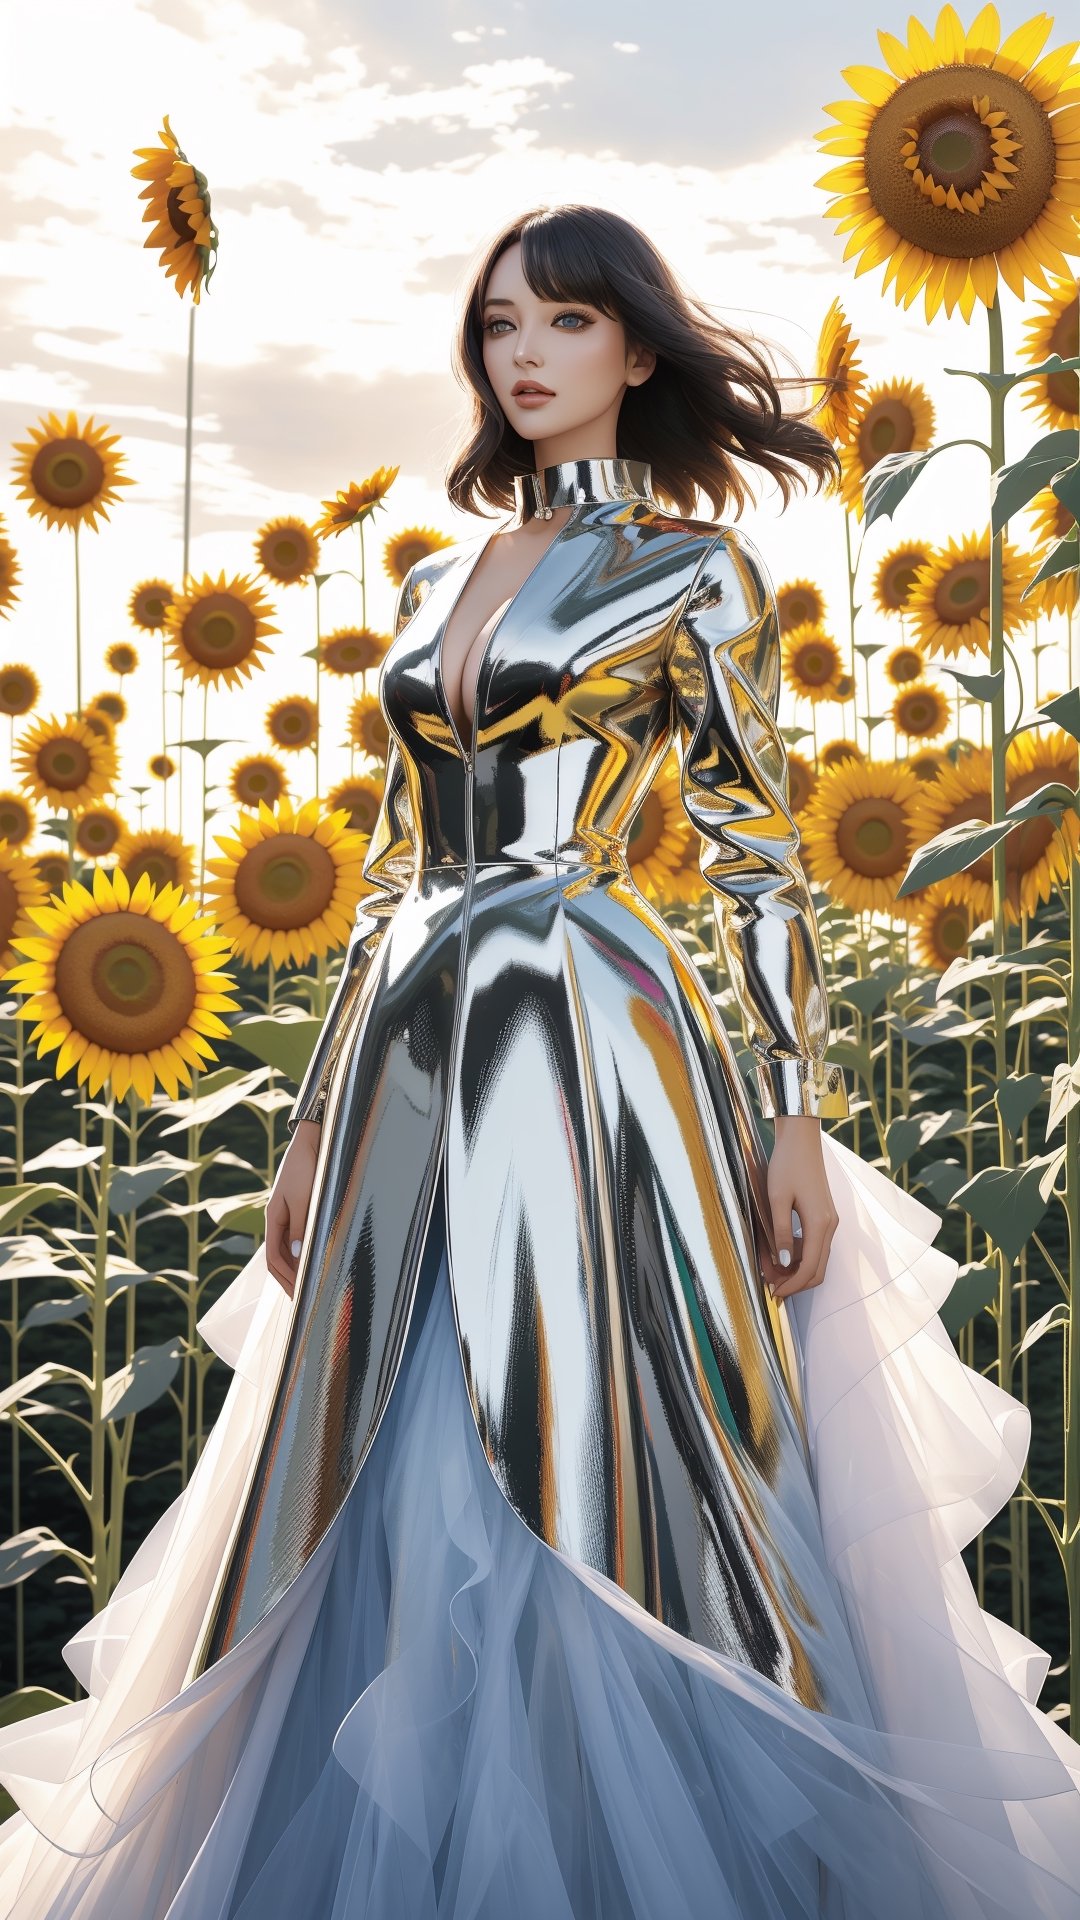 A woman with eyes like electric daisies stands amidst a field of metallic sunflowers. Her sleek, chrome gown echoes the flower's form, a fusion of nature and technology. Glitchy, detailed, high resolution.,flower_core